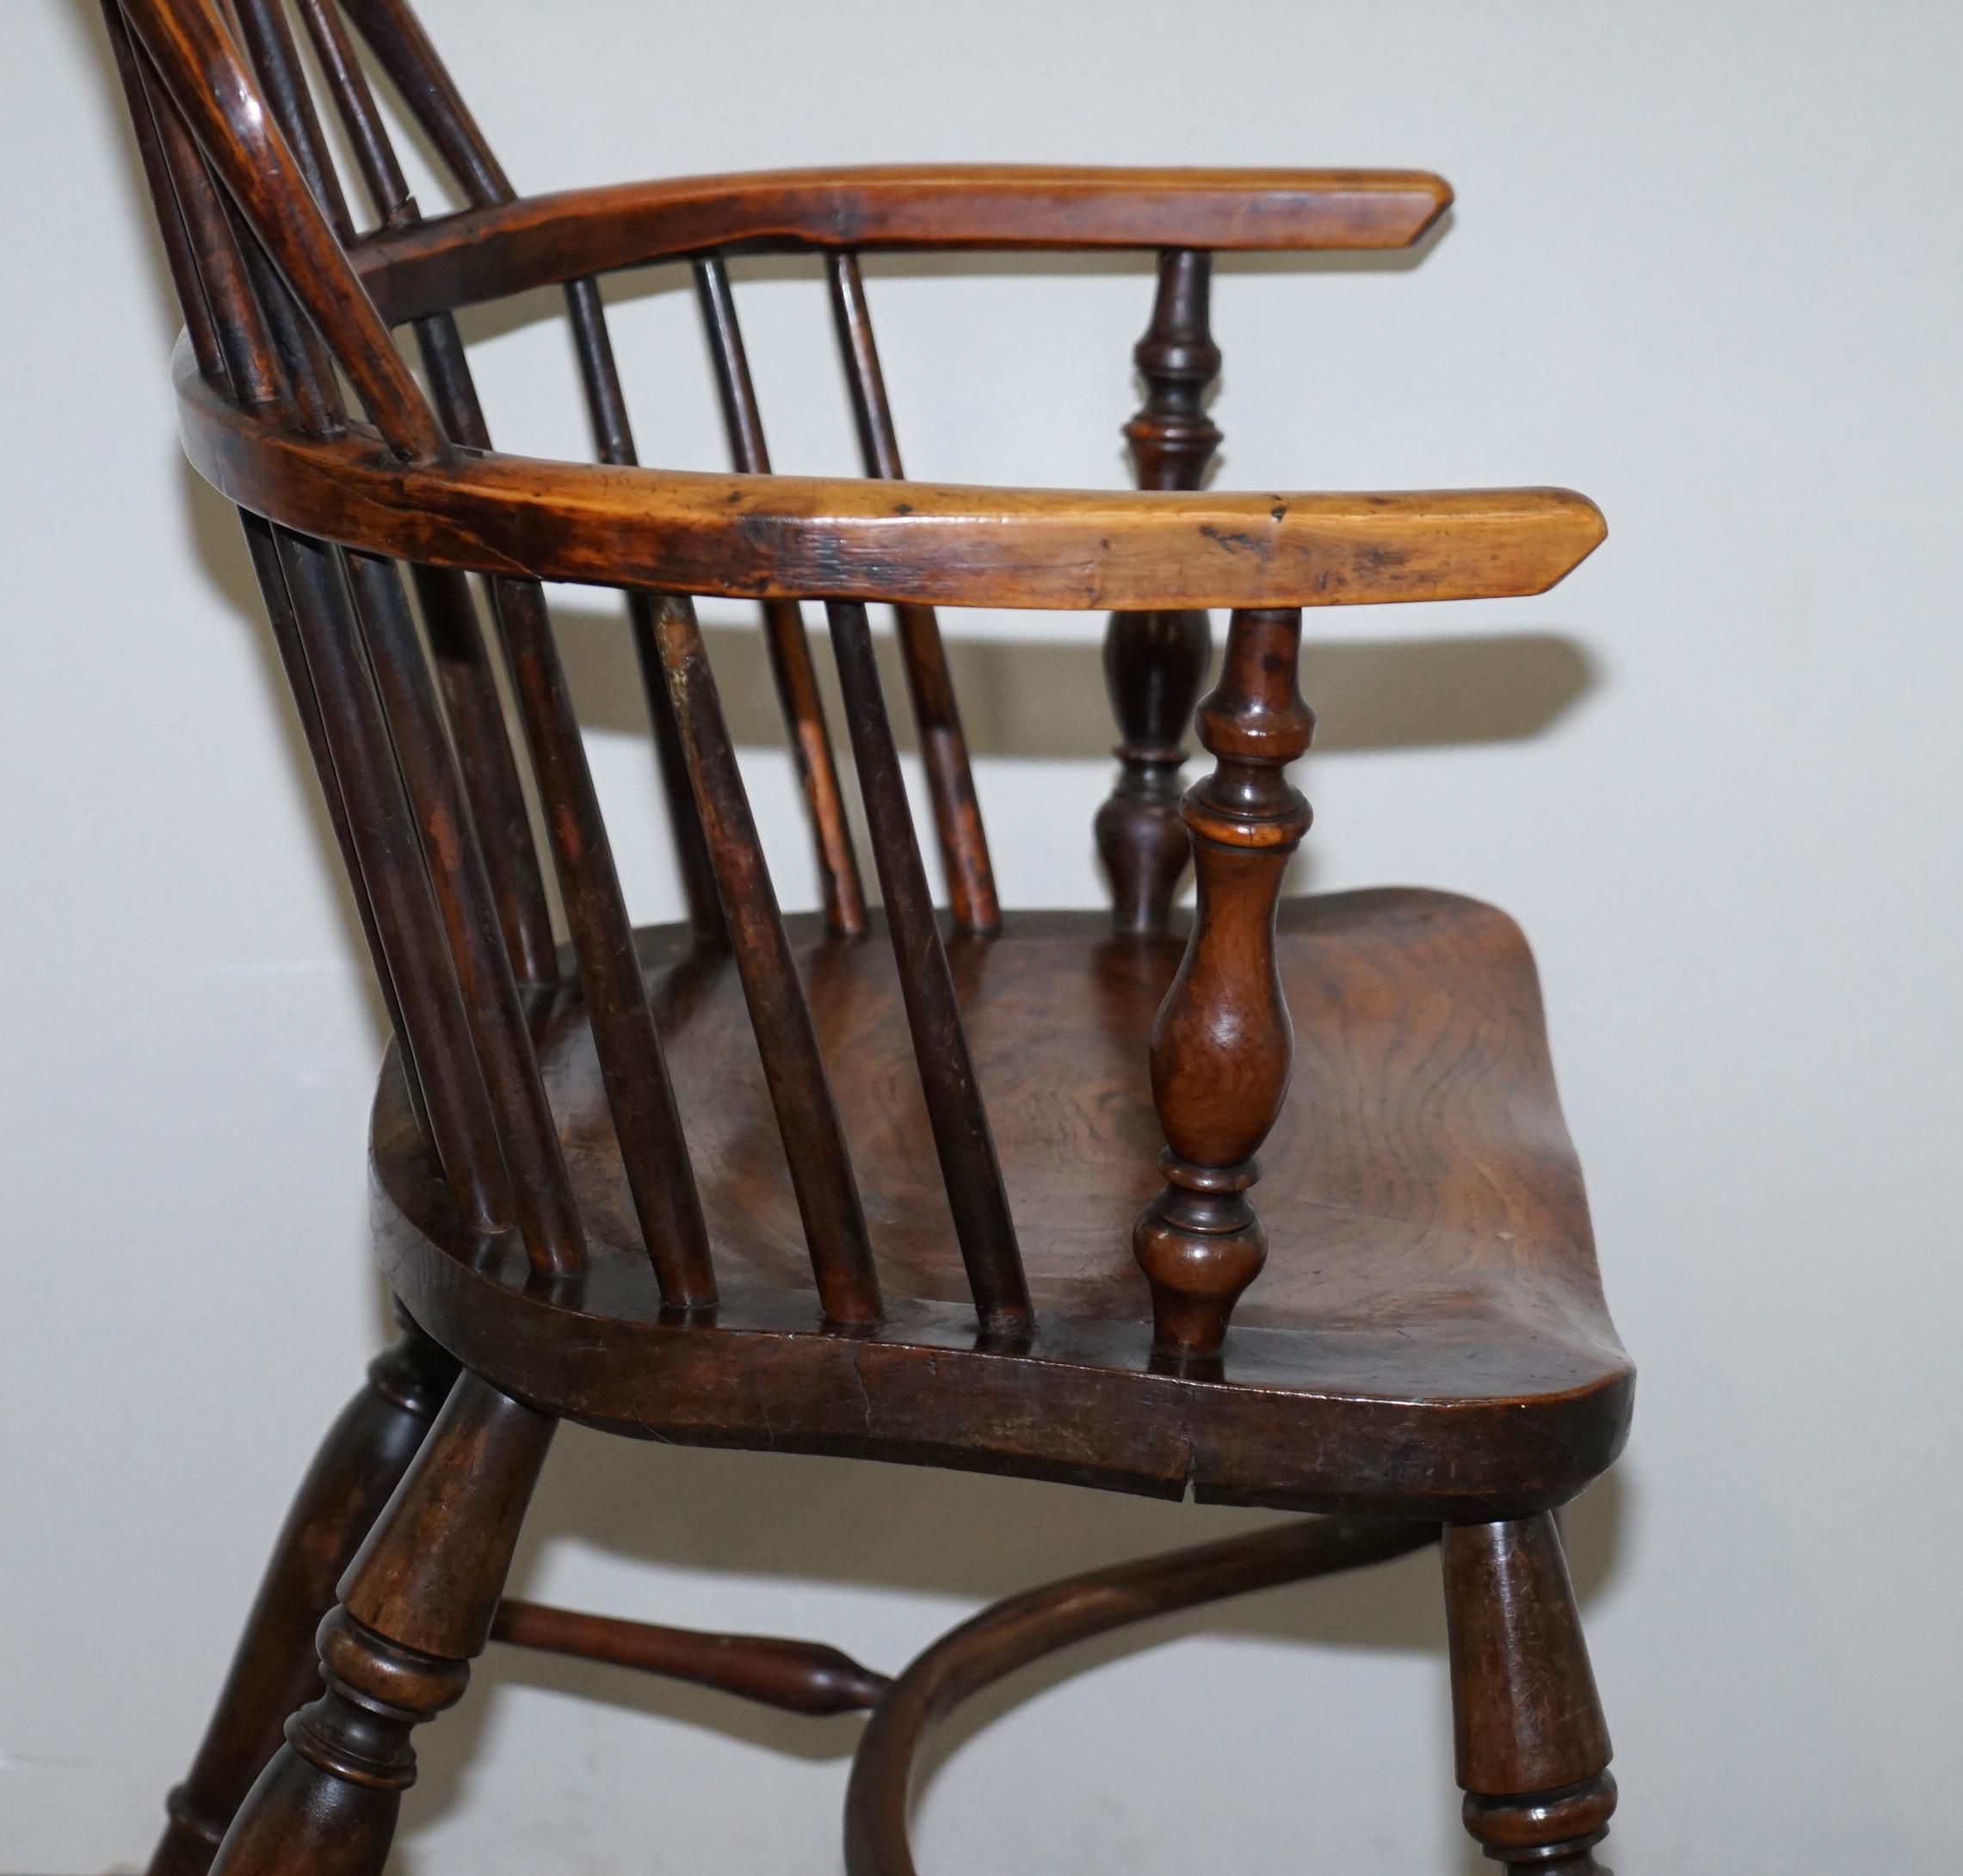 1 of 6 Solid Elm Windsor Armchairs circa 1860 English Countryhouse Furniture For Sale 6